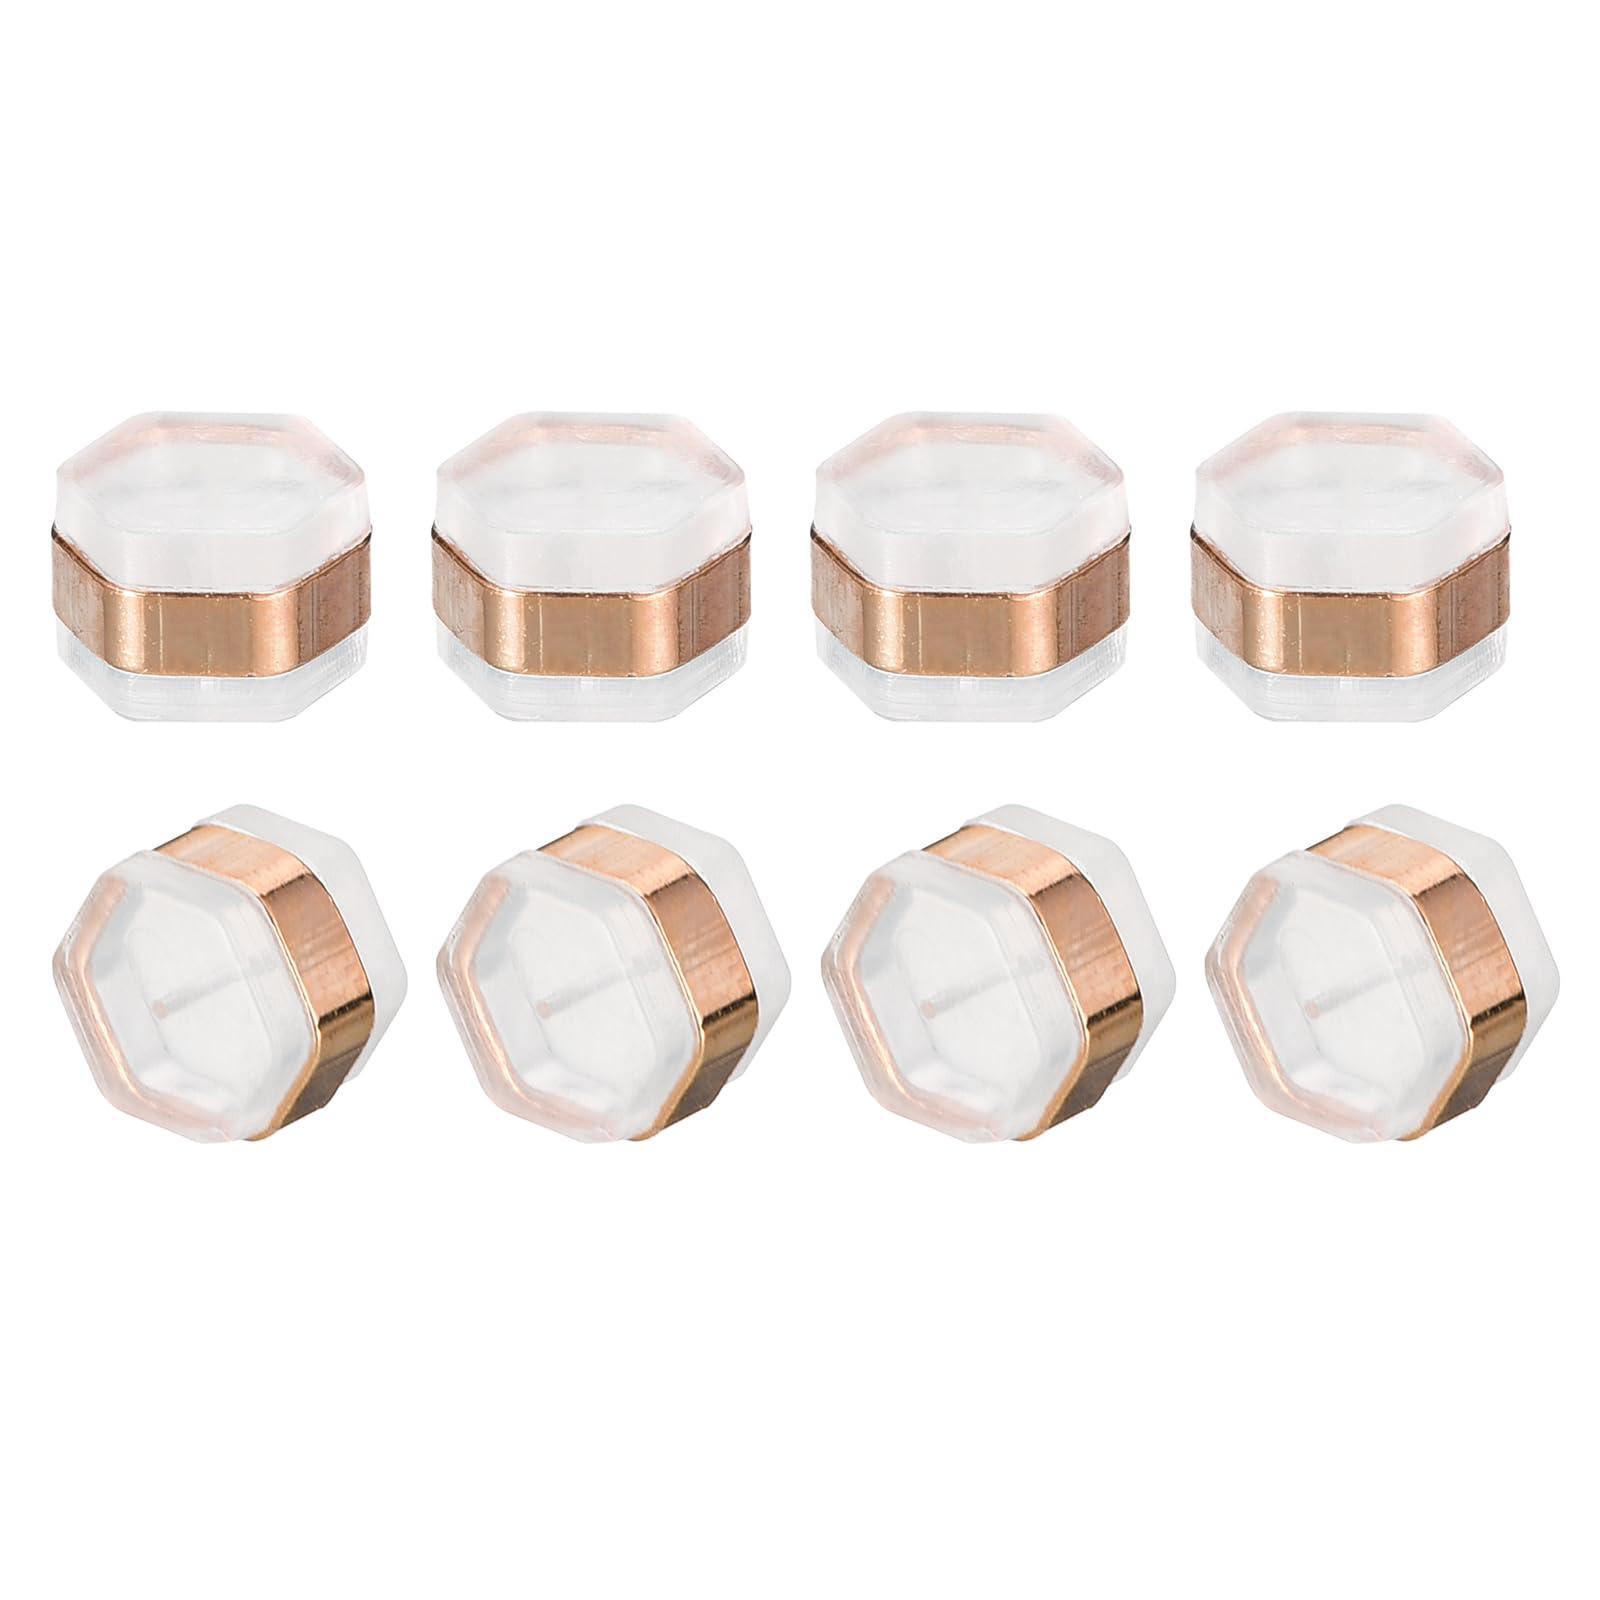 sourcing map 8Pcs Silicone Earring Backs, Soft Clear Earring Stoppers Replacement Hexagon Rubber Earring Backs for Studs Fish Hook Earrings, 4.6mm Rose Gold